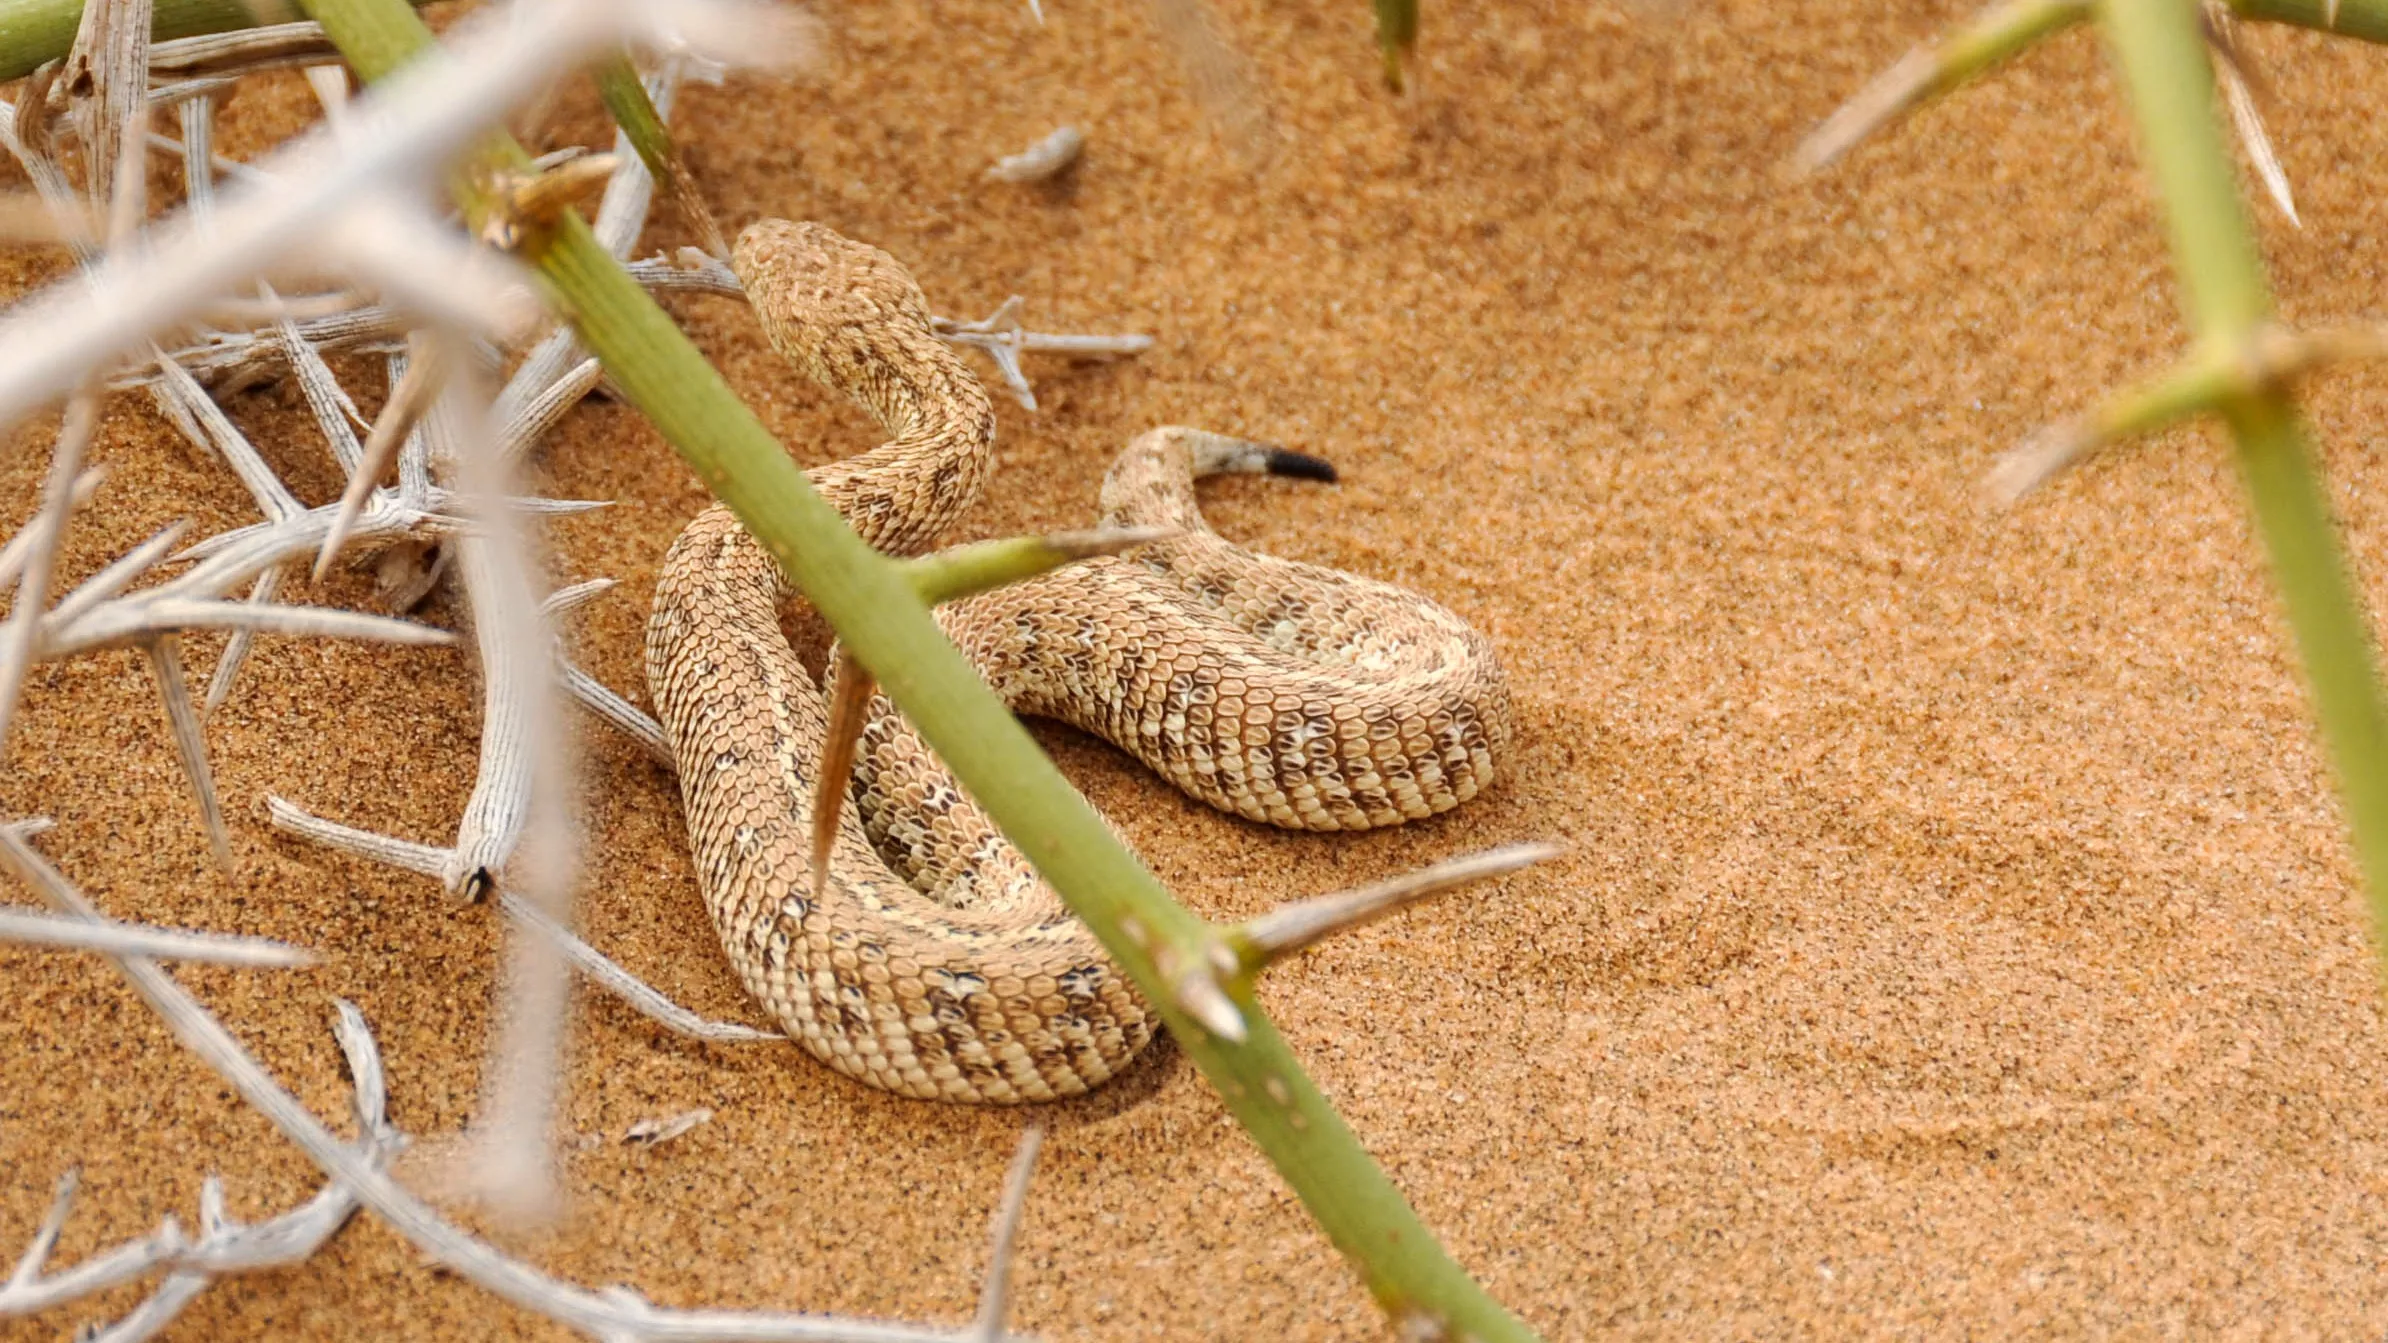 Living Desert Snake Park in Namibia, Africa | Zoos & Sanctuaries - Rated 3.3